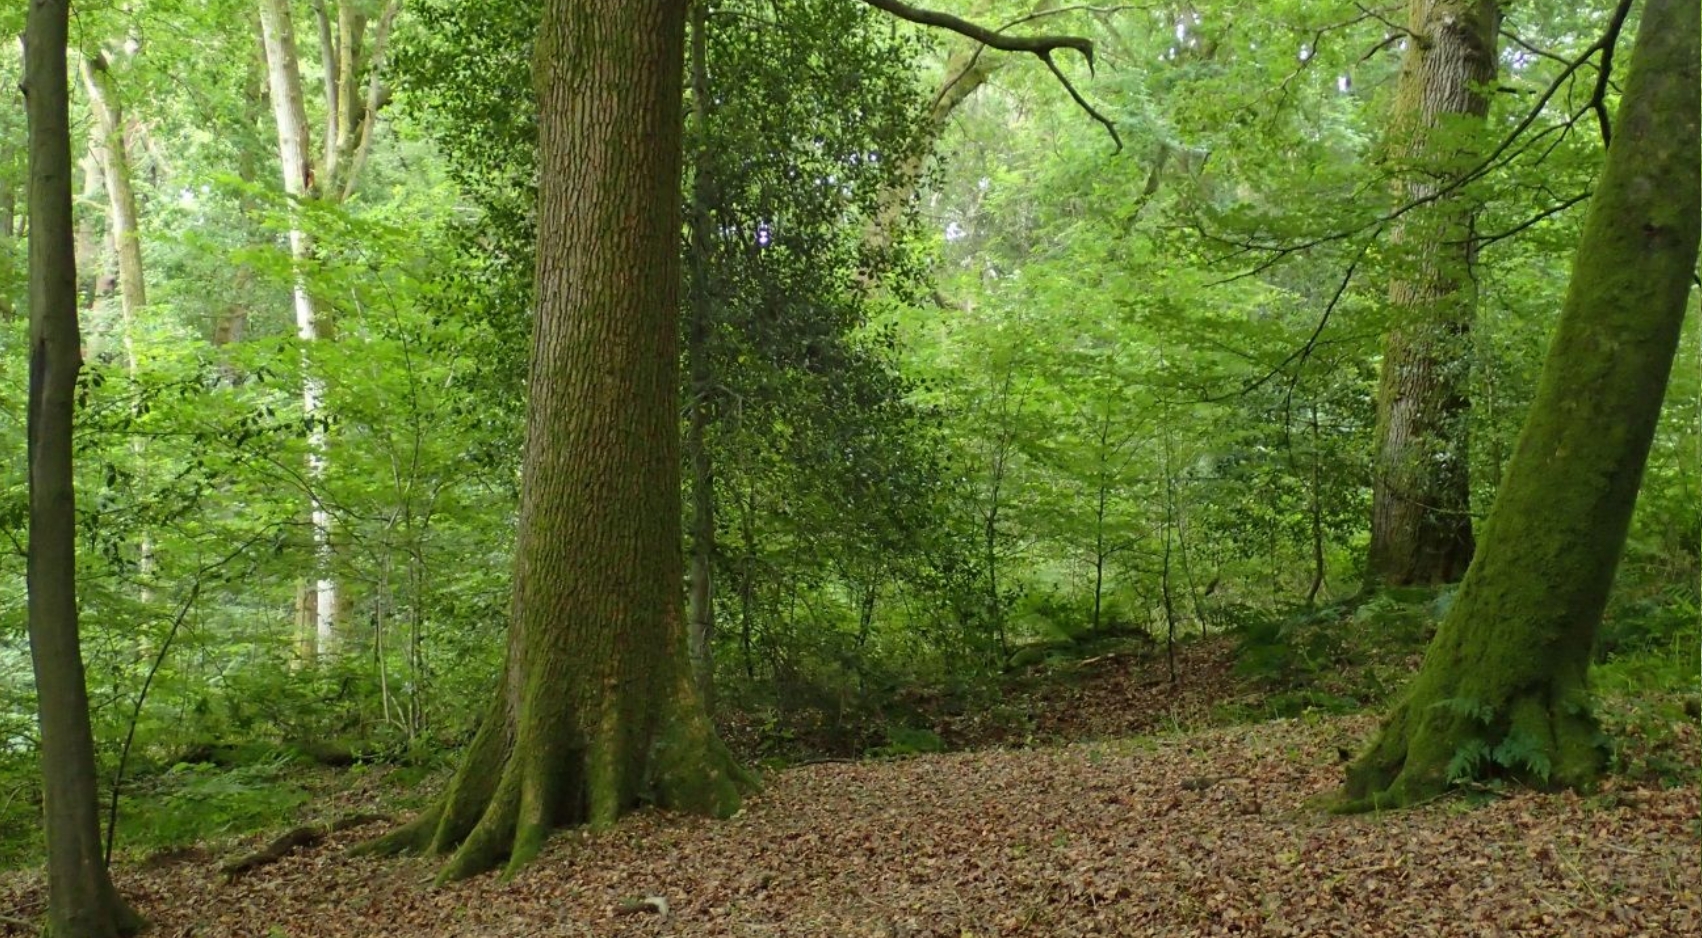 Temperate boreal forest, Petworth, Sussex. (Photo courtesy of David Keith, UNSW)